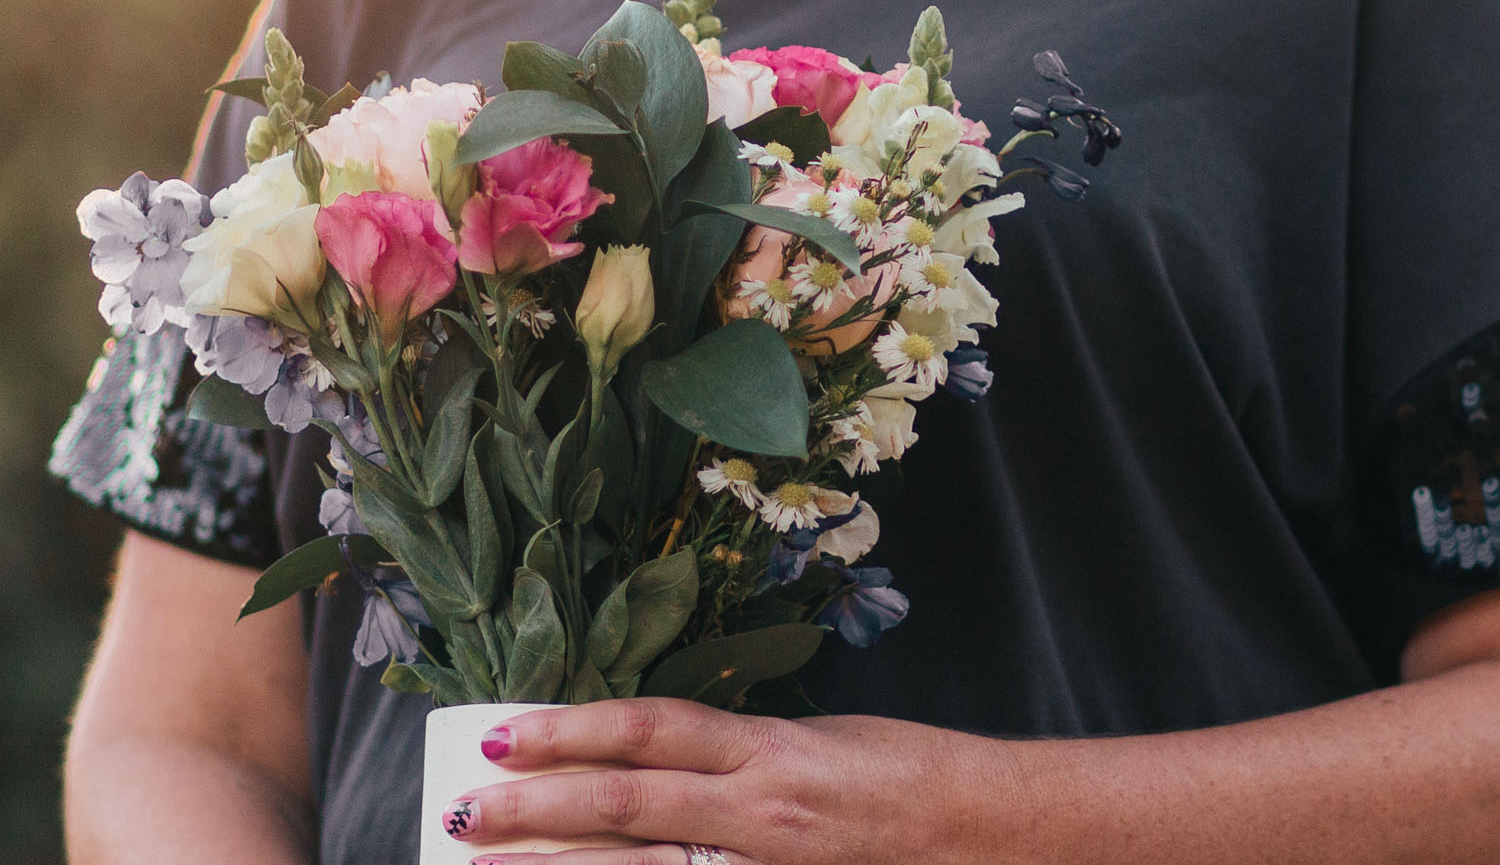 Hands holding a vase with a floral bouquet